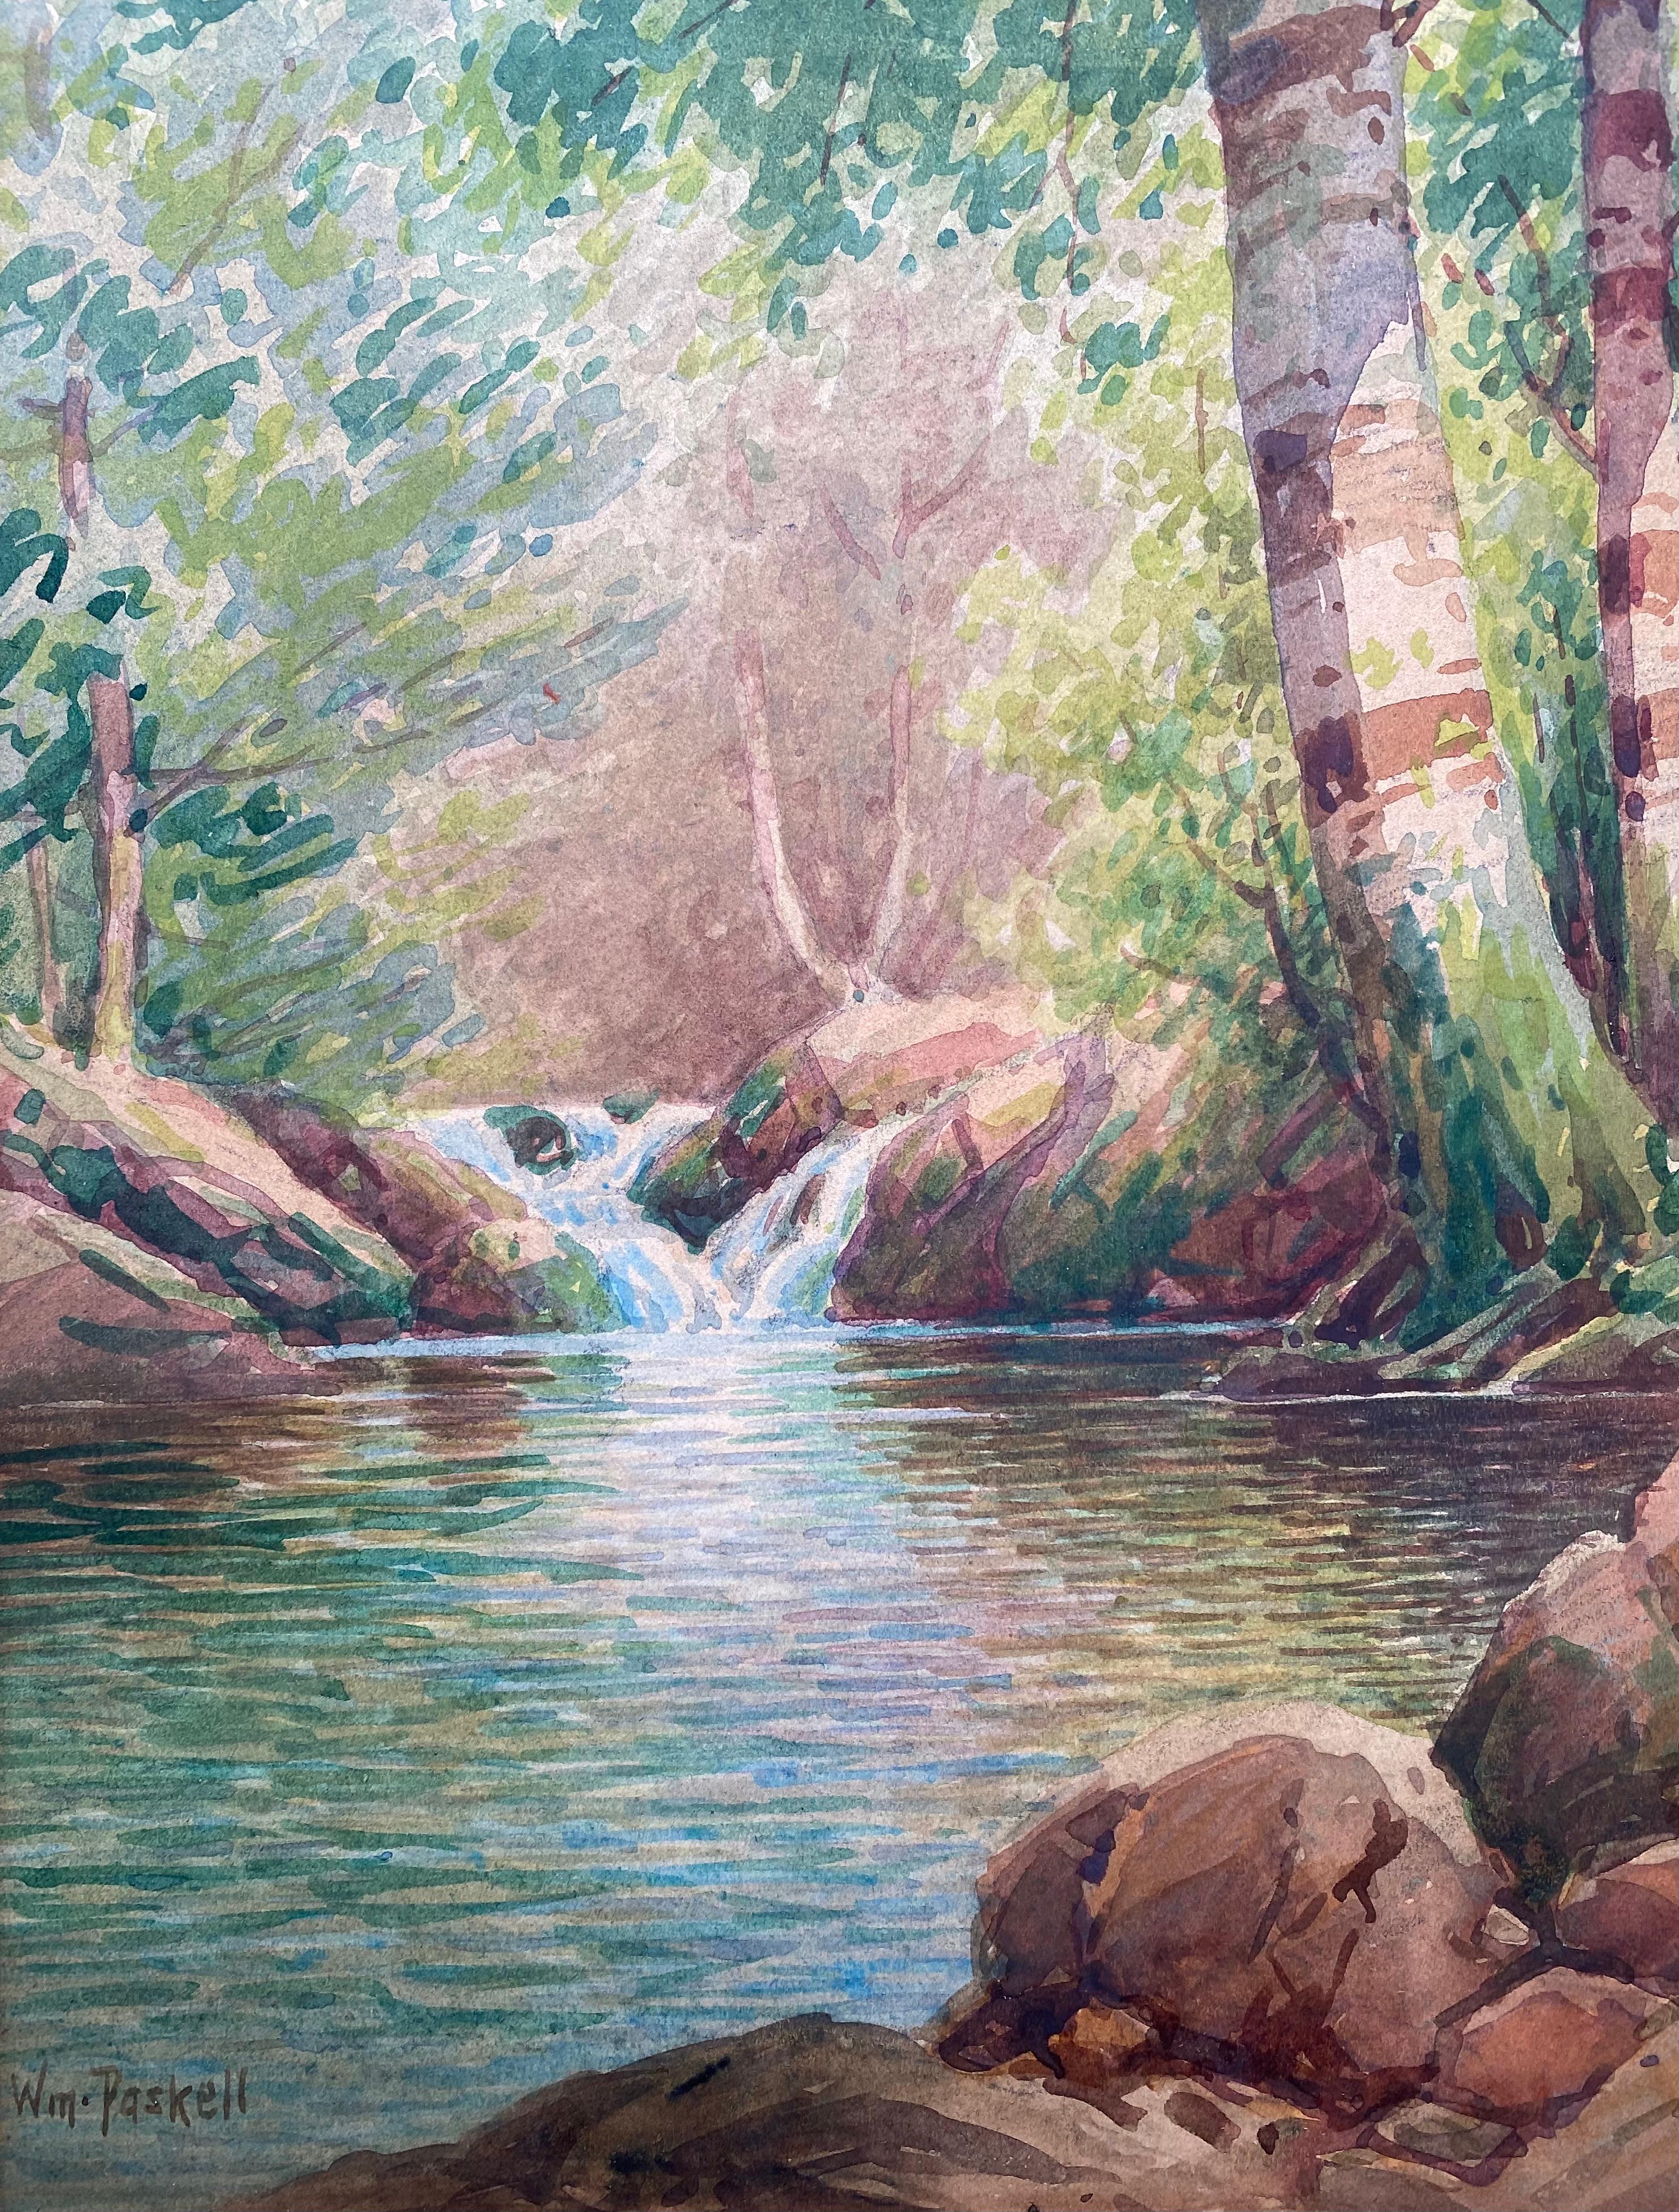 “Waterfall with Birches” - Post-Impressionist Art by William Frederick Paskell 